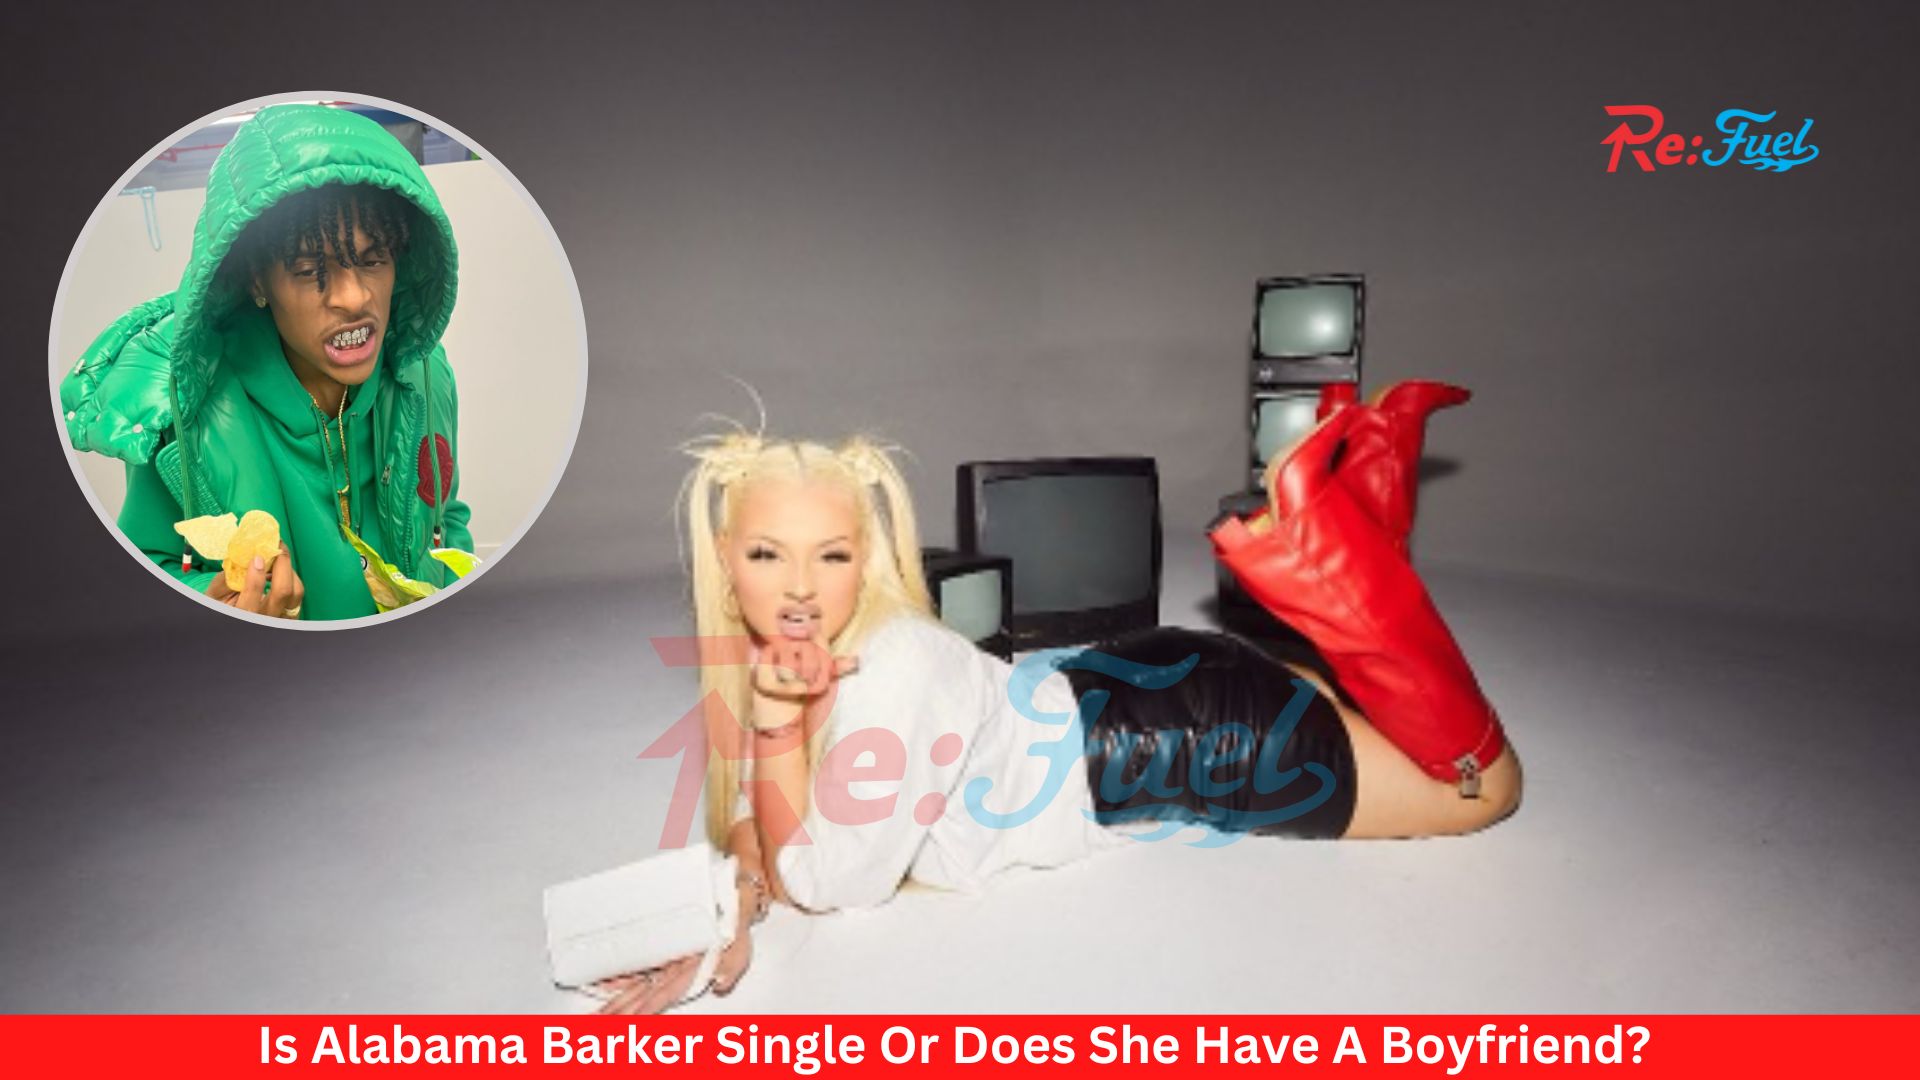 Is Alabama Barker Single Or Does She Have A Boyfriend?